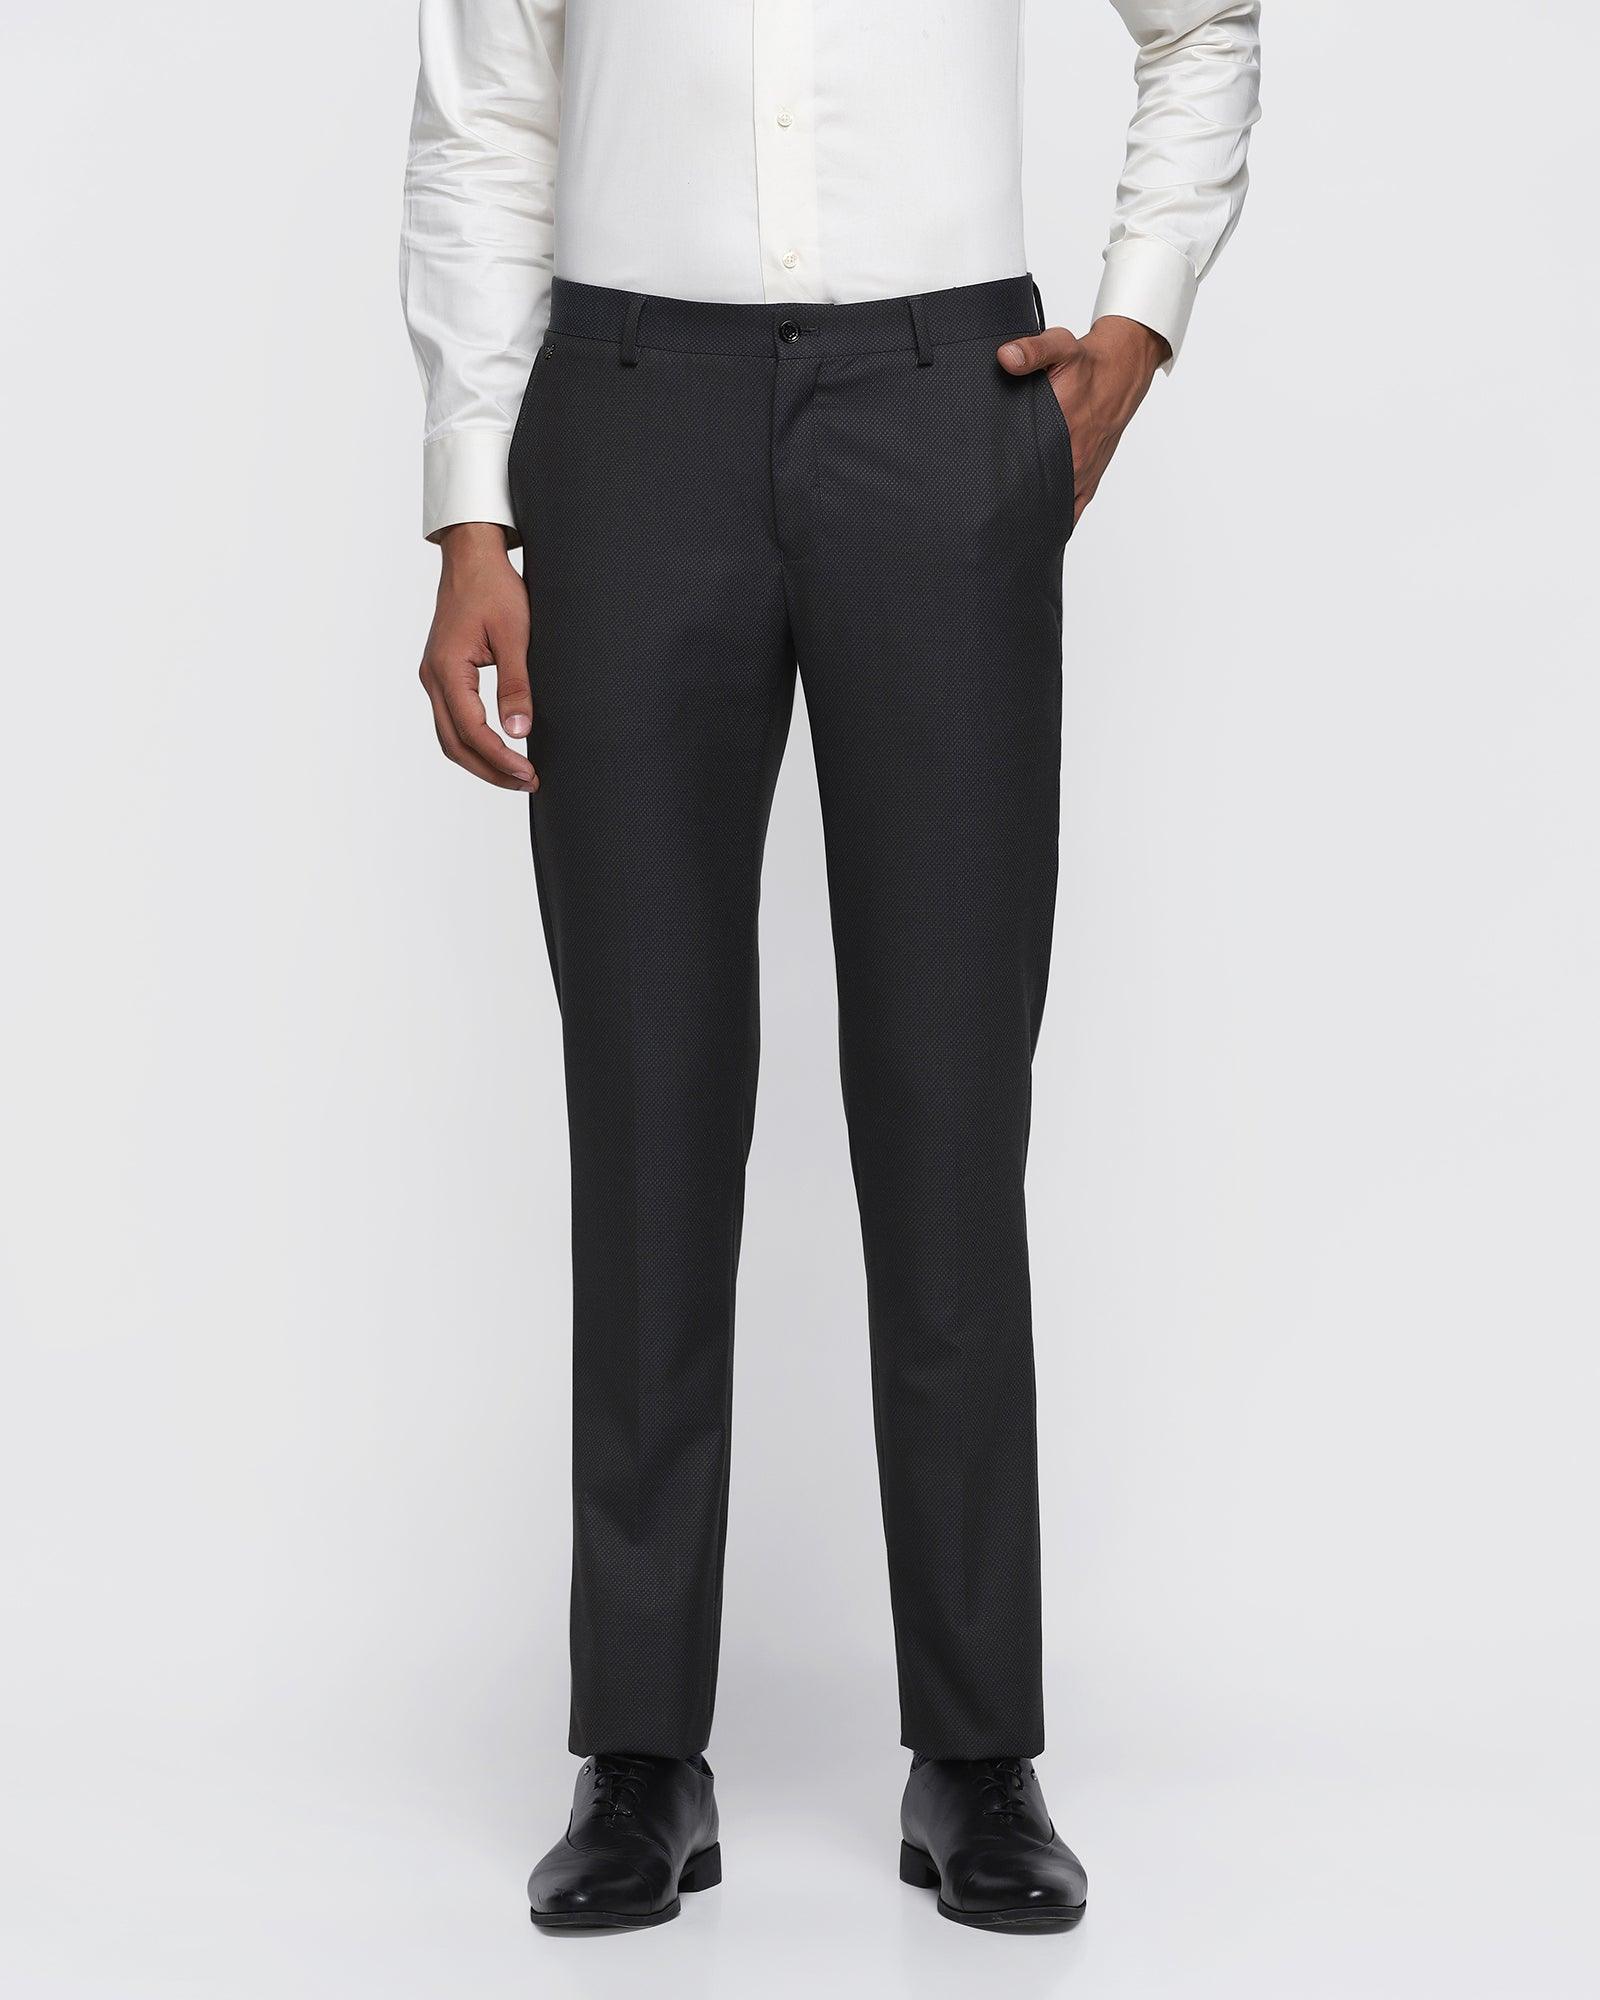 Slim Comfort B-95 Formal Charcoal Textured Trouser - Will